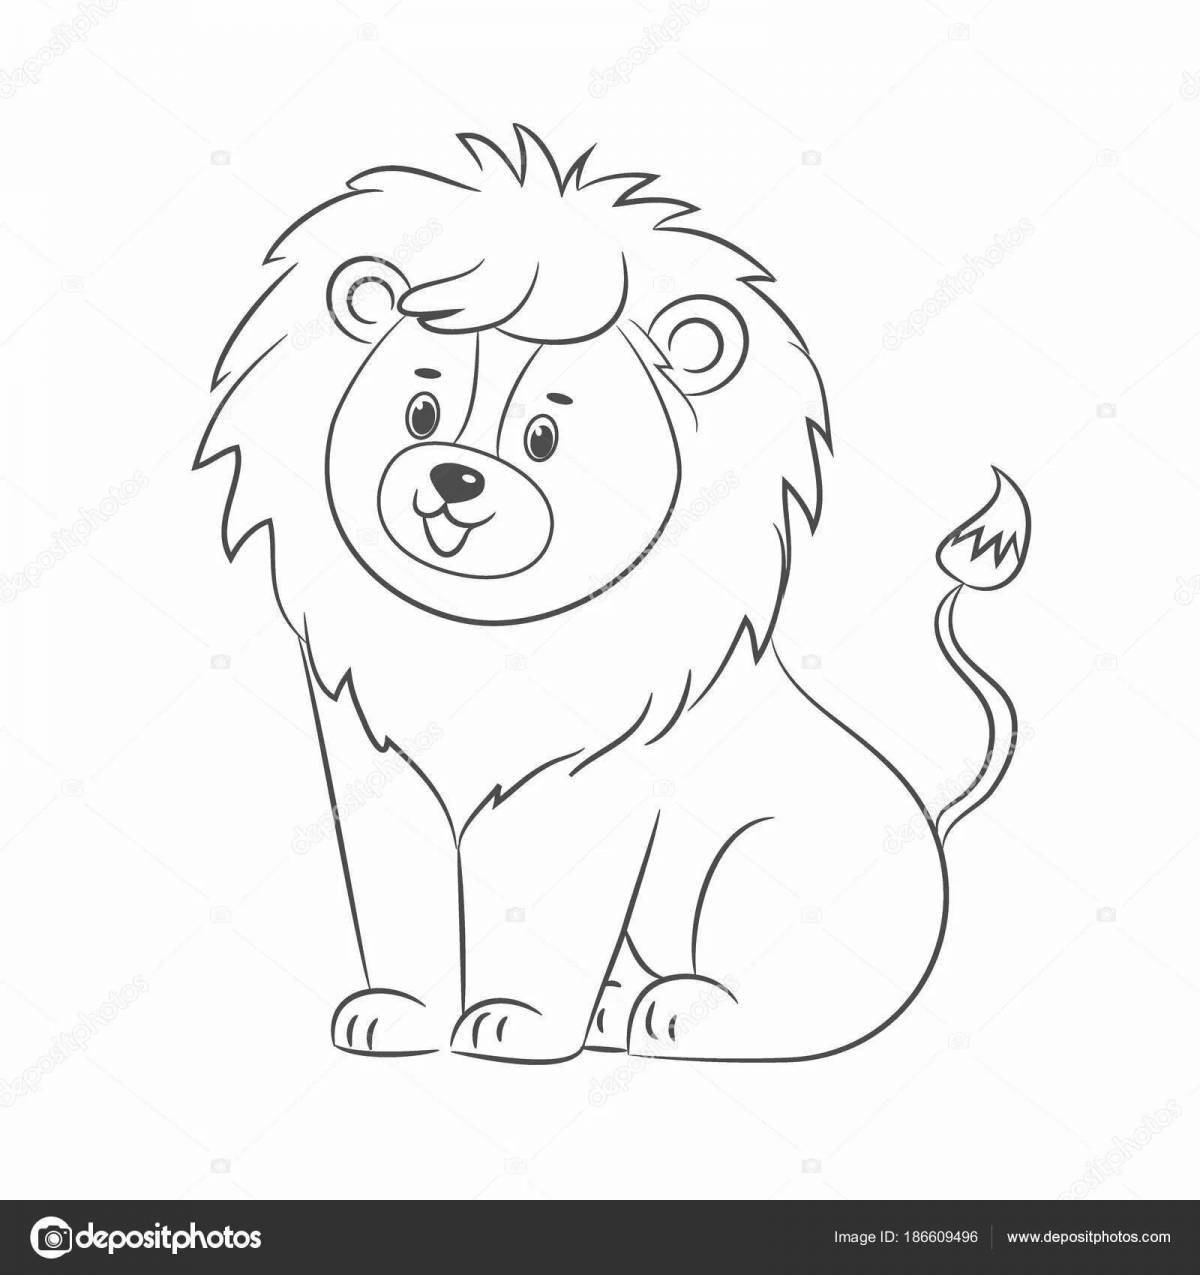 Coloring page with a wonderful drawing of a lion